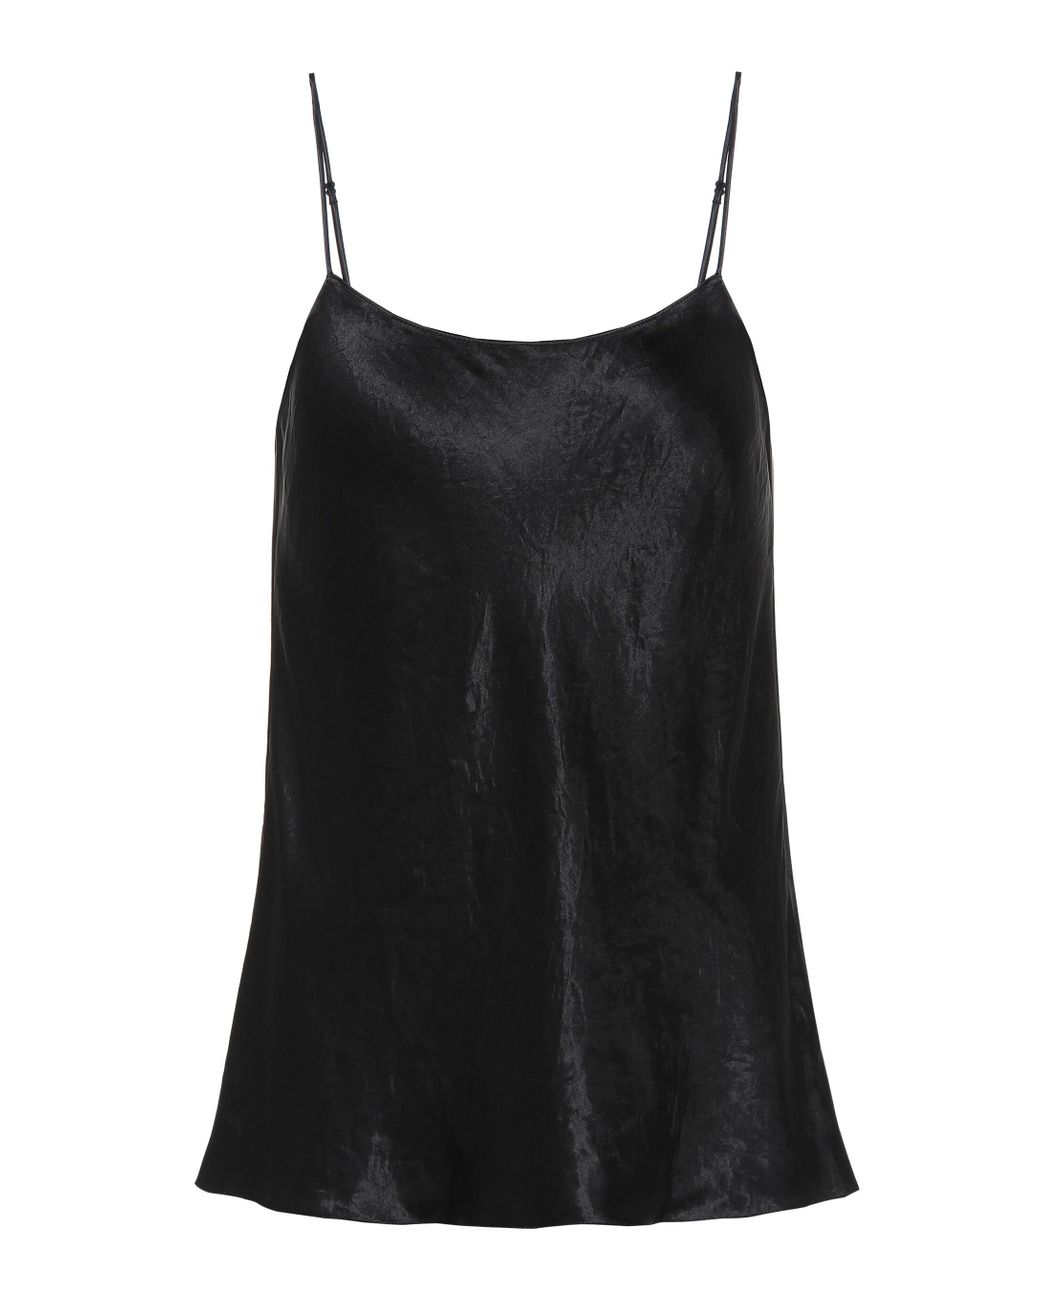 Vince Satin Camisole in Black - Lyst